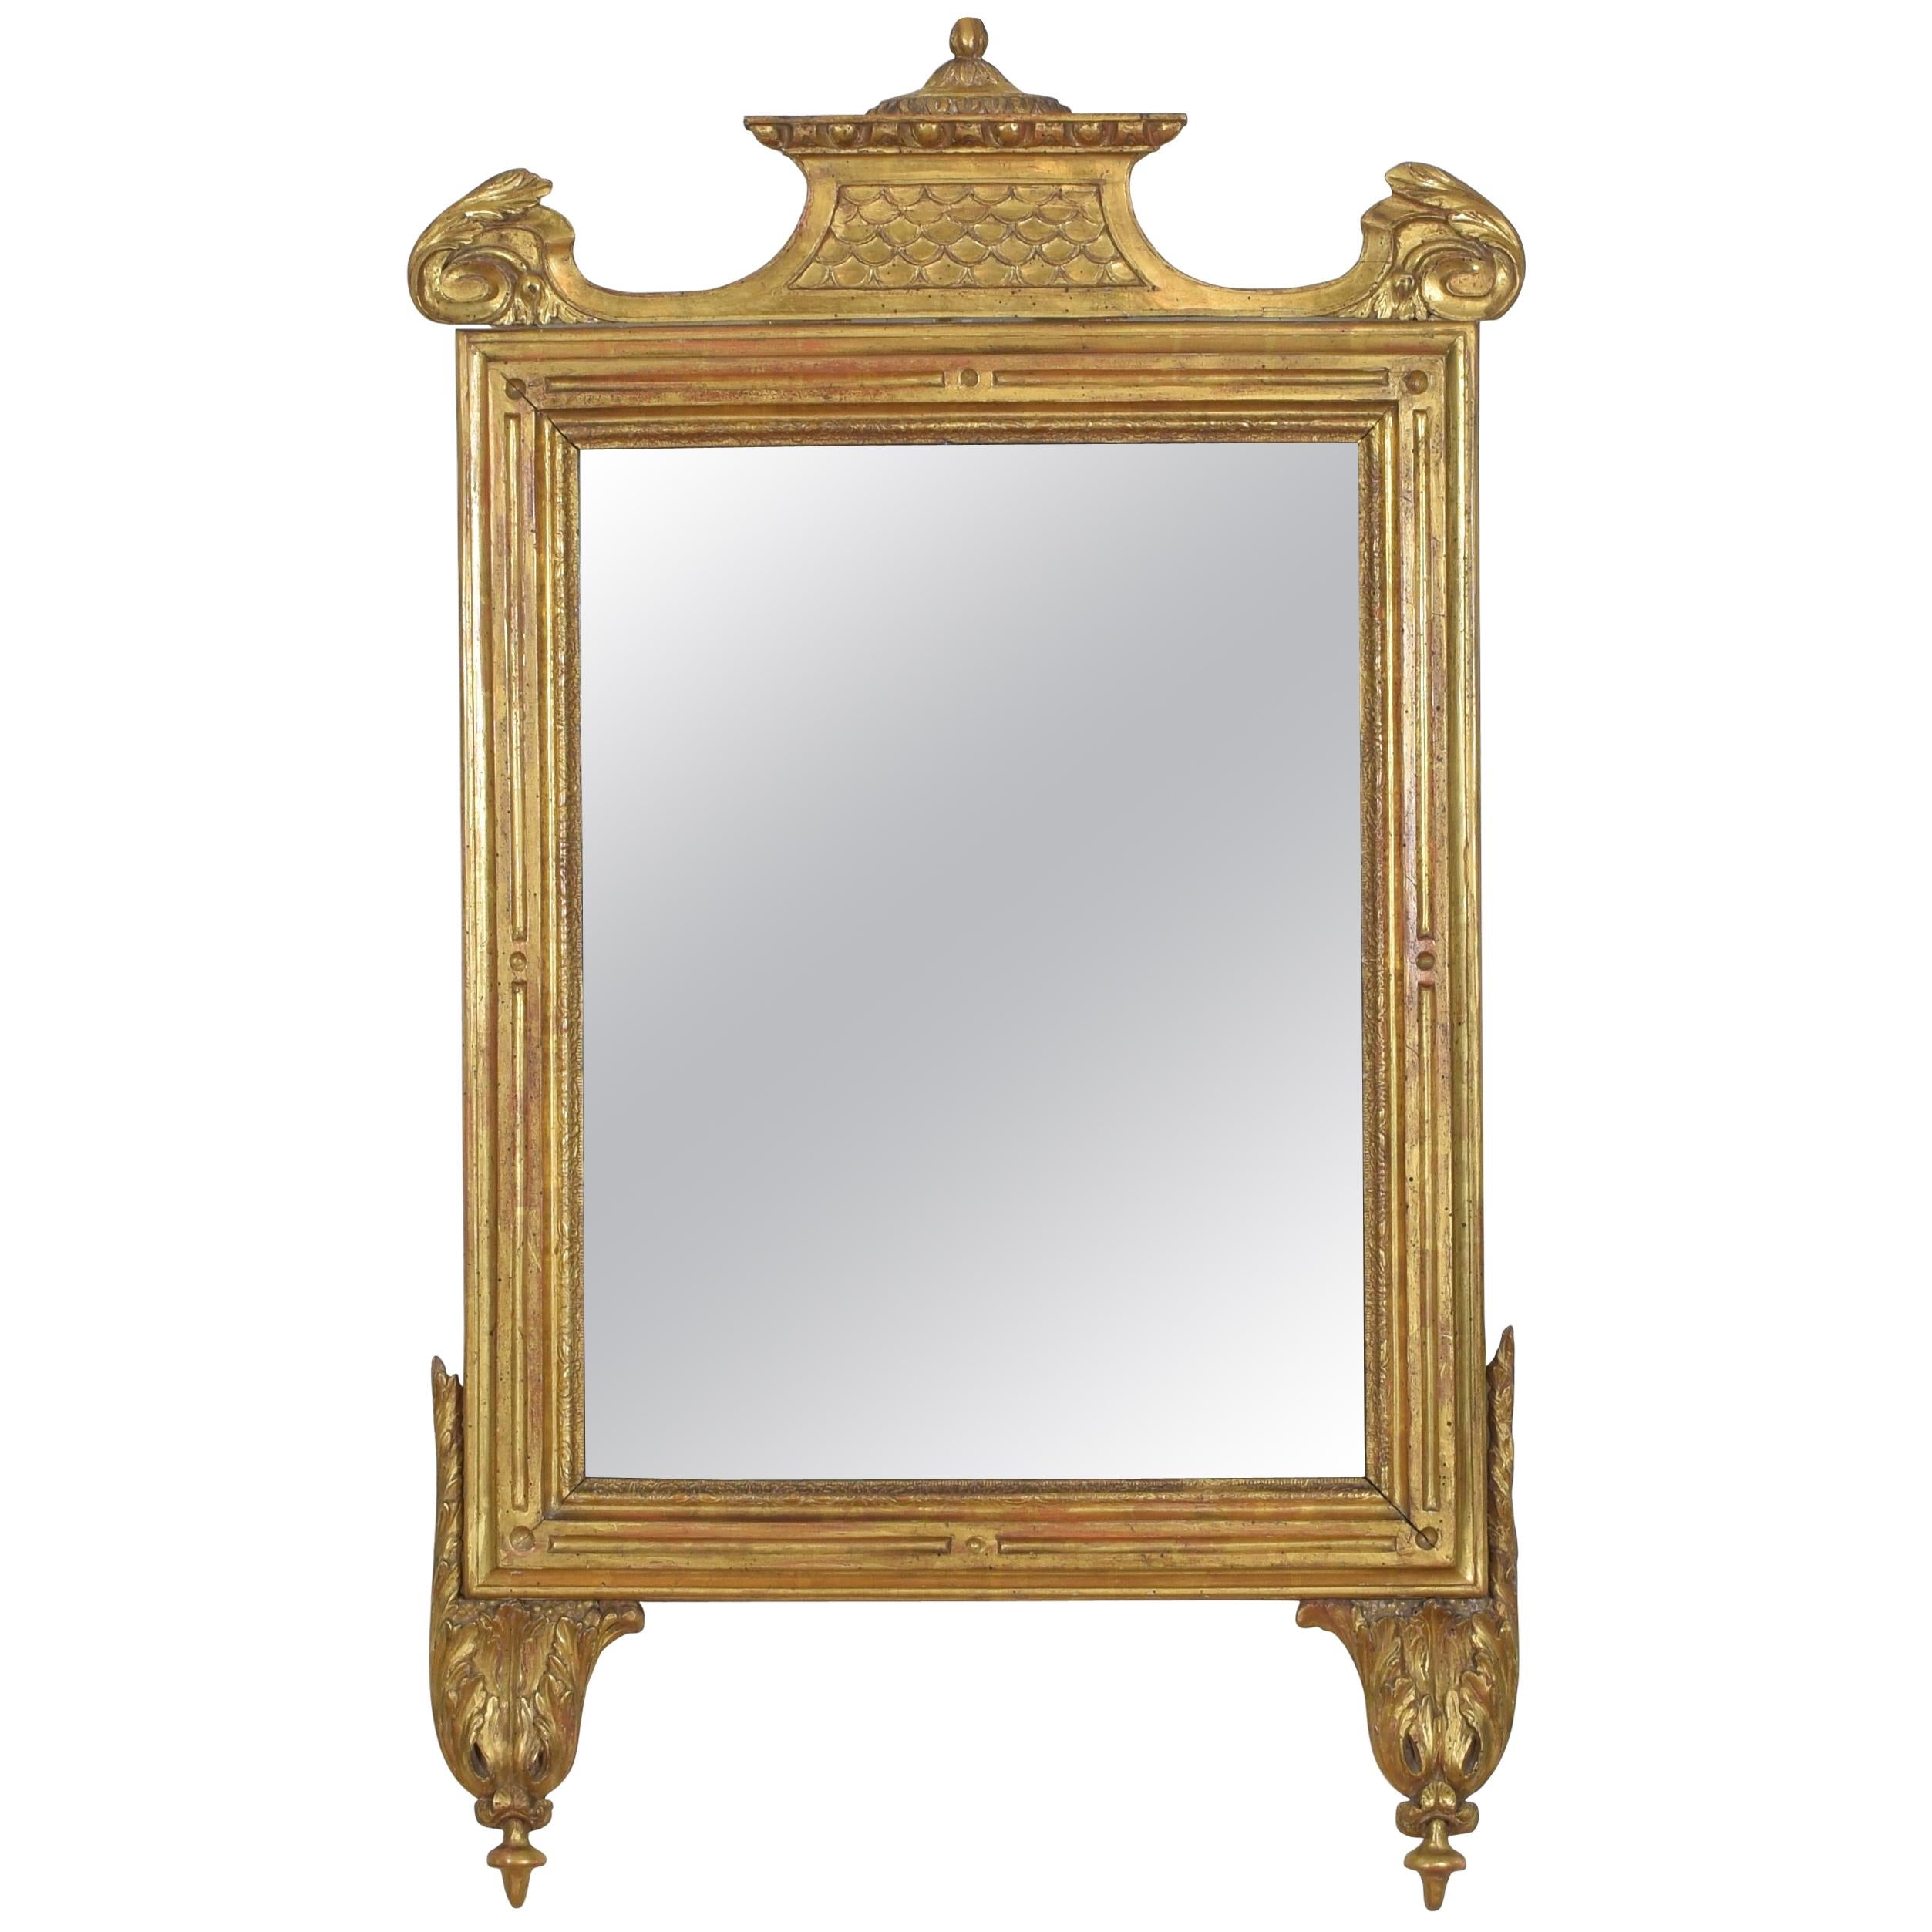 Italian Early Neoclassical Carved Giltwood Mirror, Last Quarter of 18th Century